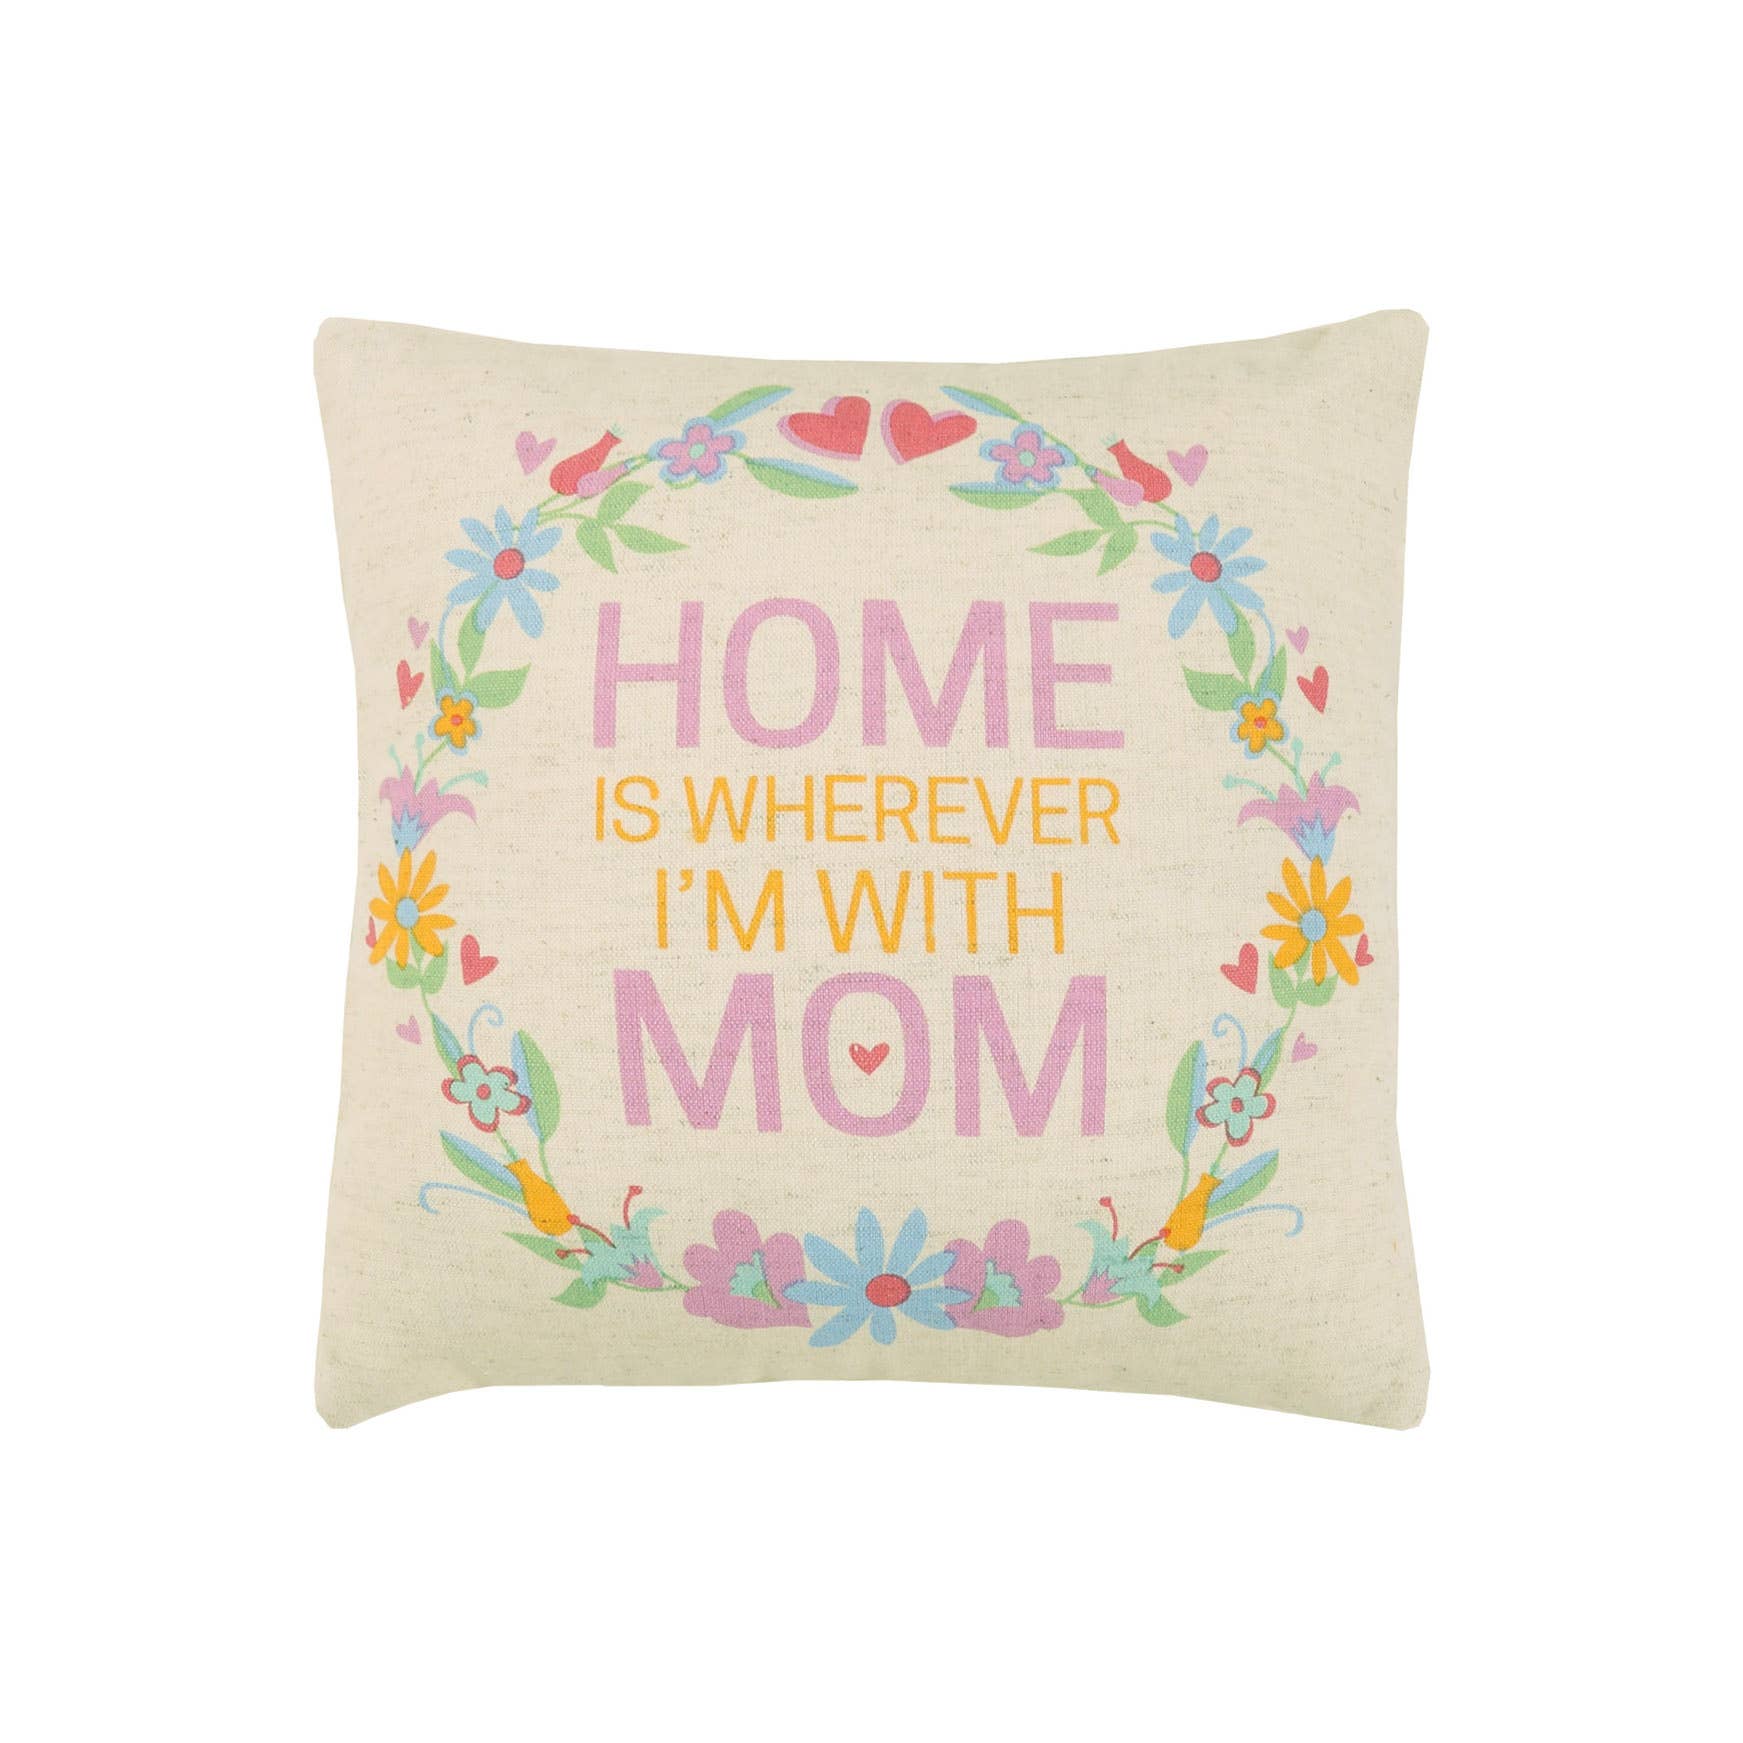 Home Is Wherever I'm With Mom Pillow